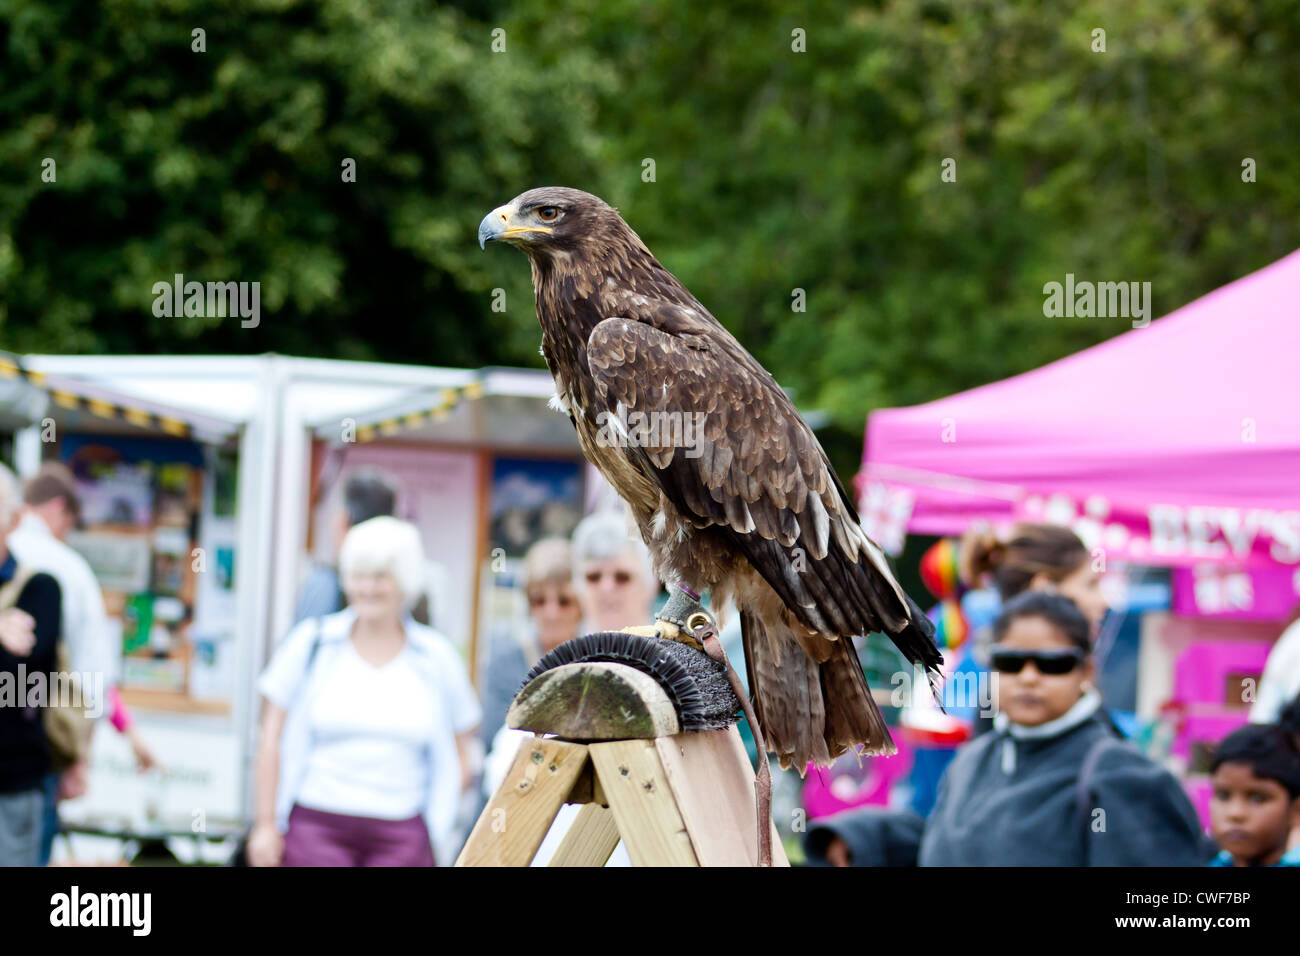 Tawny Eagle (Aquila rapax) 'Askari'   during a falconry display at the Burley show 2012 in the New Forest Hampshire Stock Photo